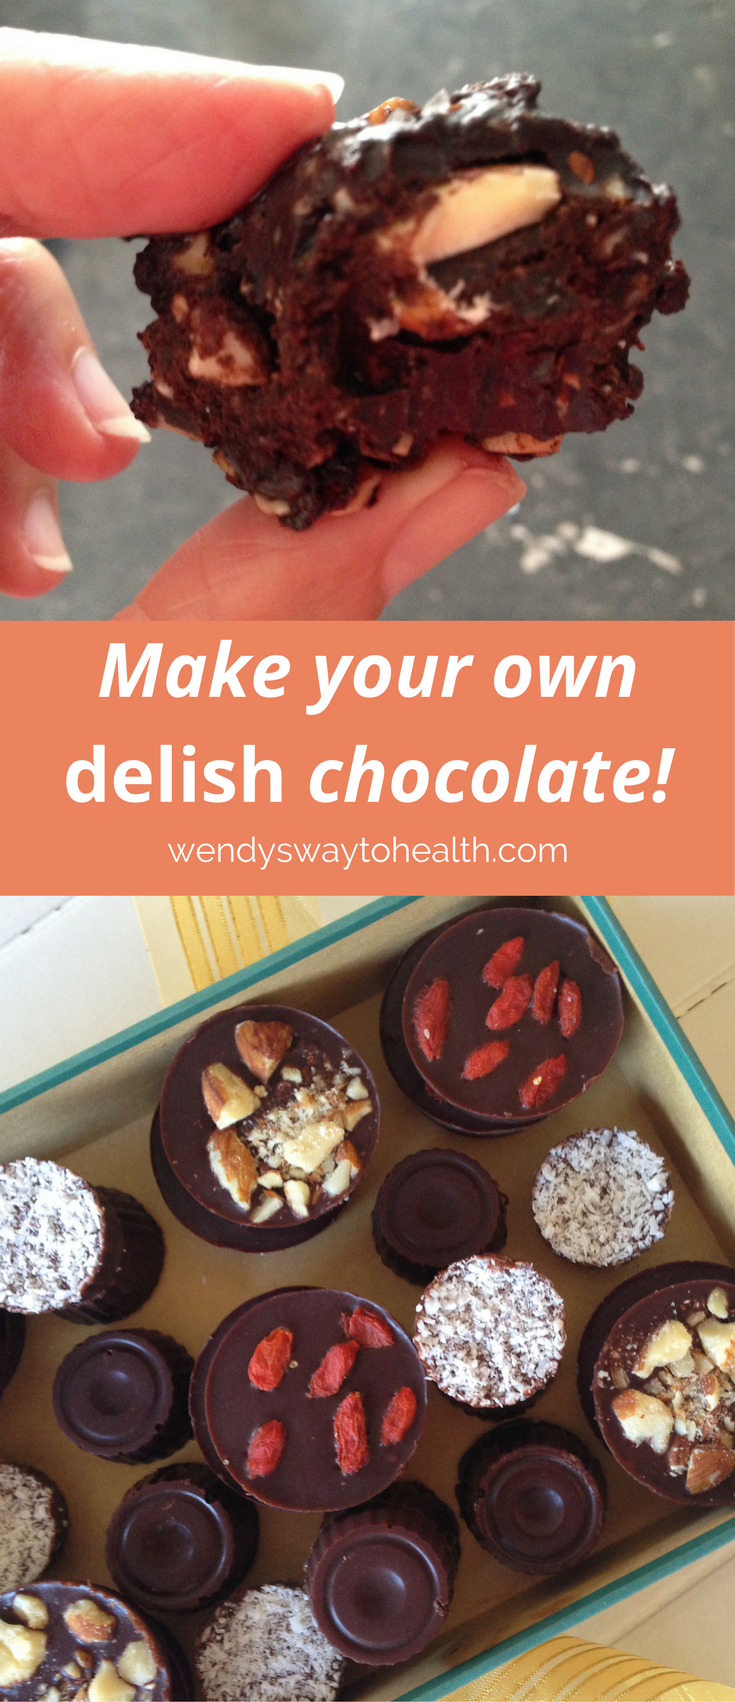 healthy chocolate pin image with a chocolate cluster, and a box of chocolates